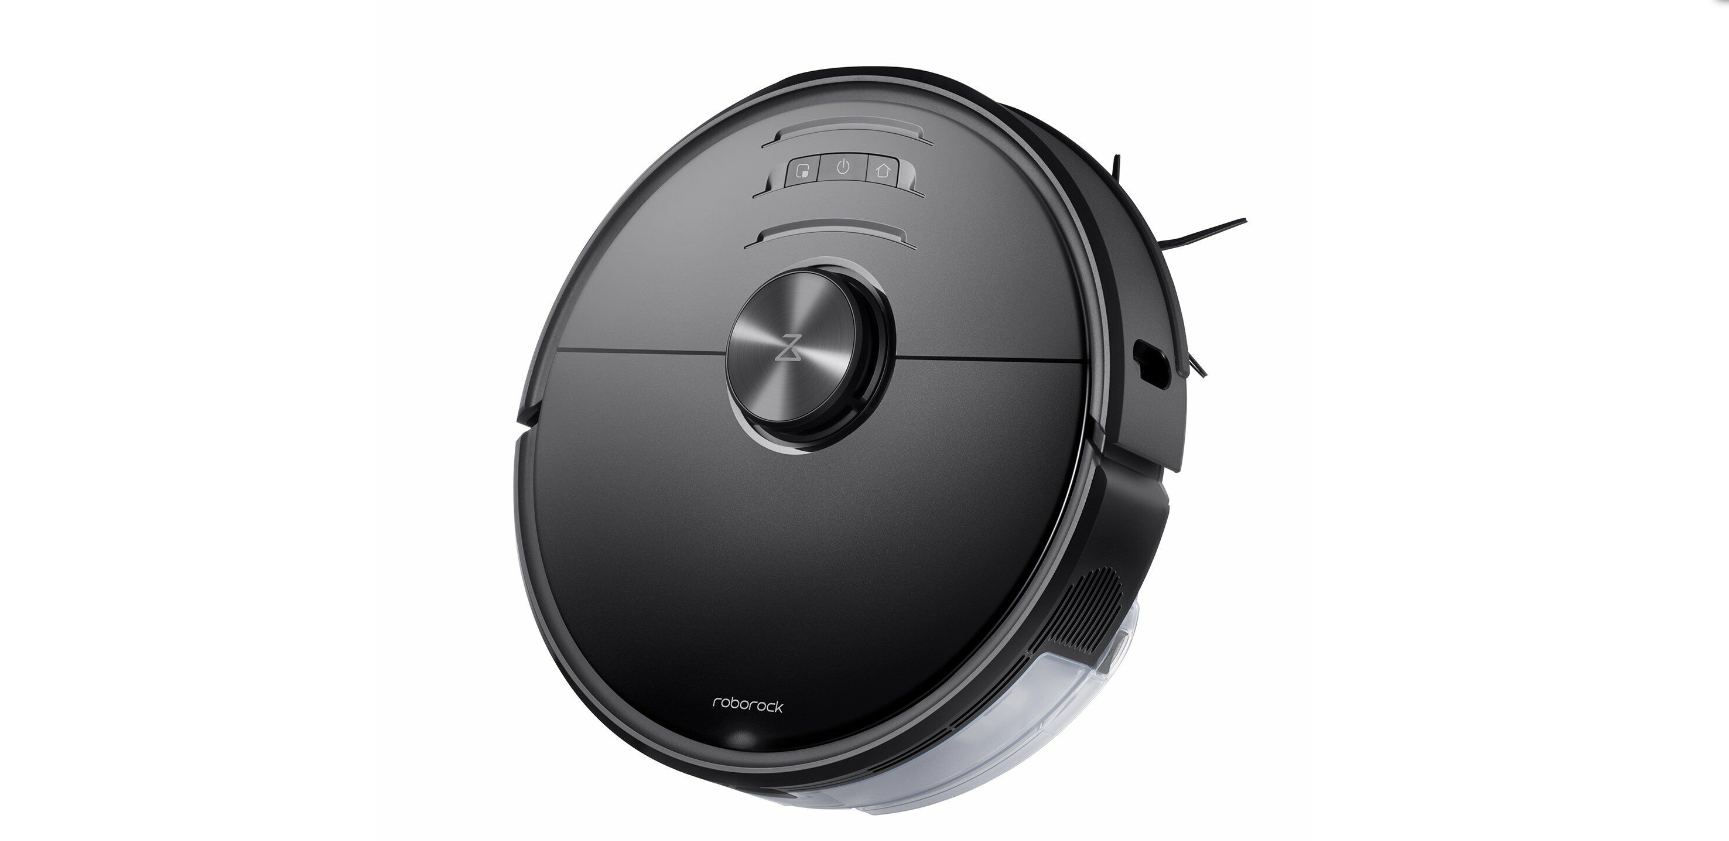 Roborock S6 MaxV Robot Vacuum & Mop Cleaner $639.20(was $1199) delivered with coupon @ eBay